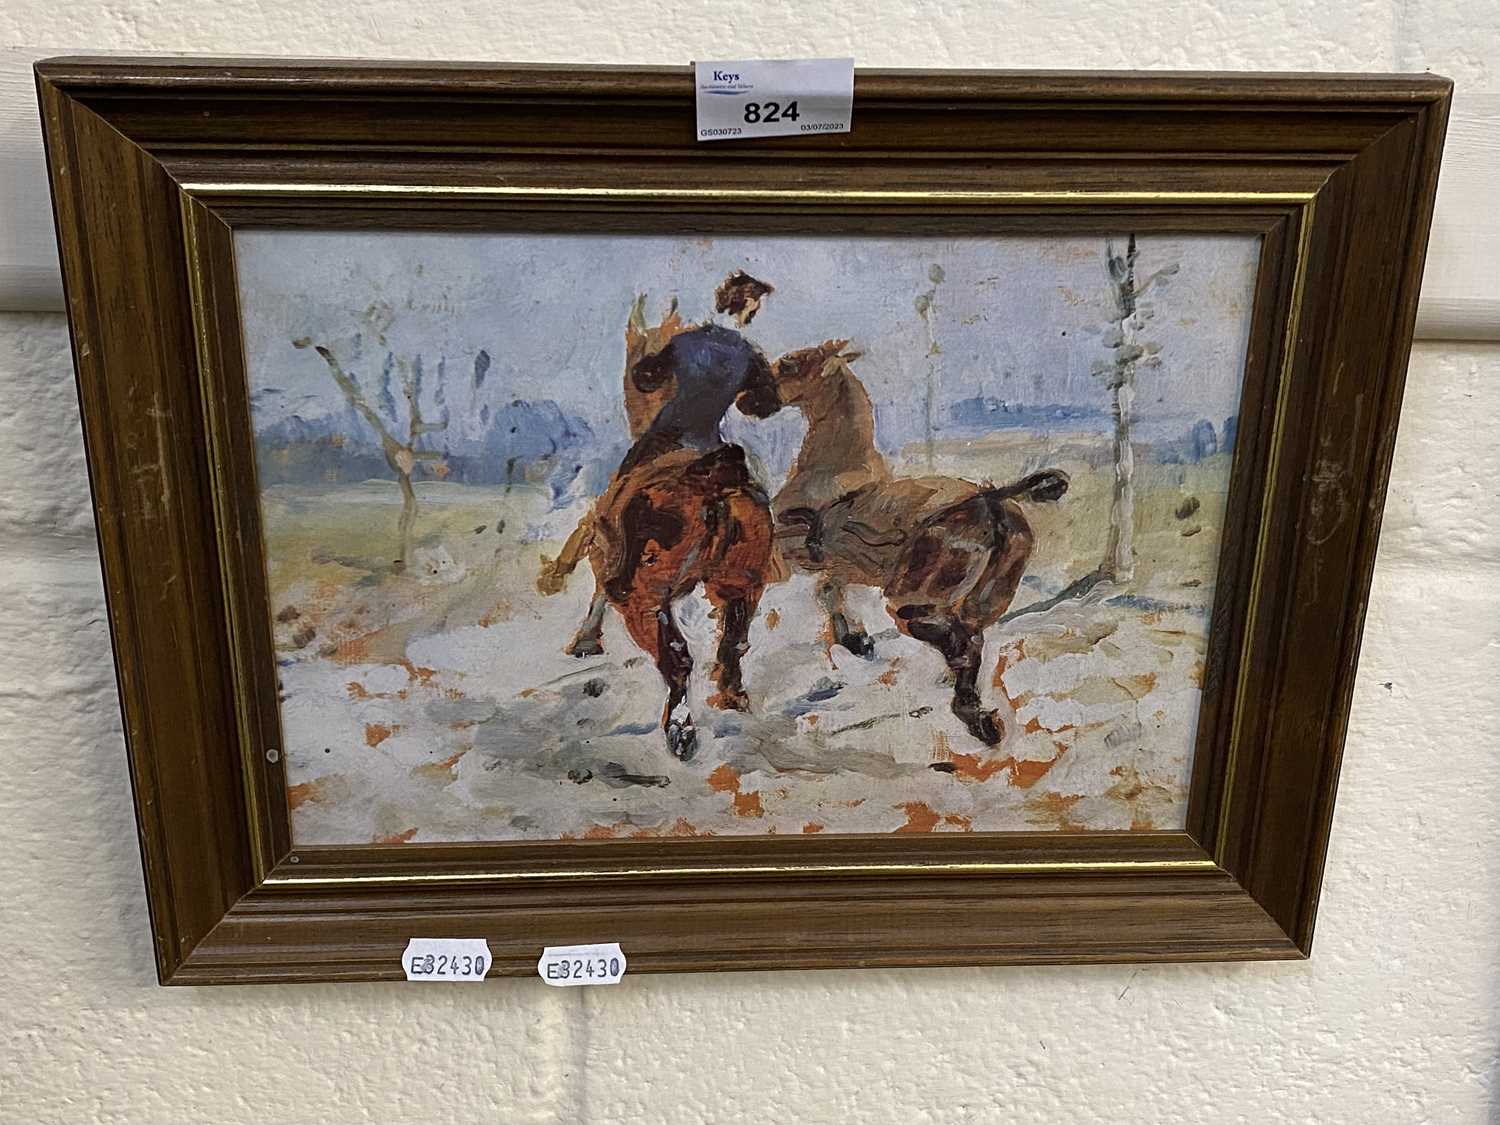 A reproduction impressionistic print of a rider and two horses, framed